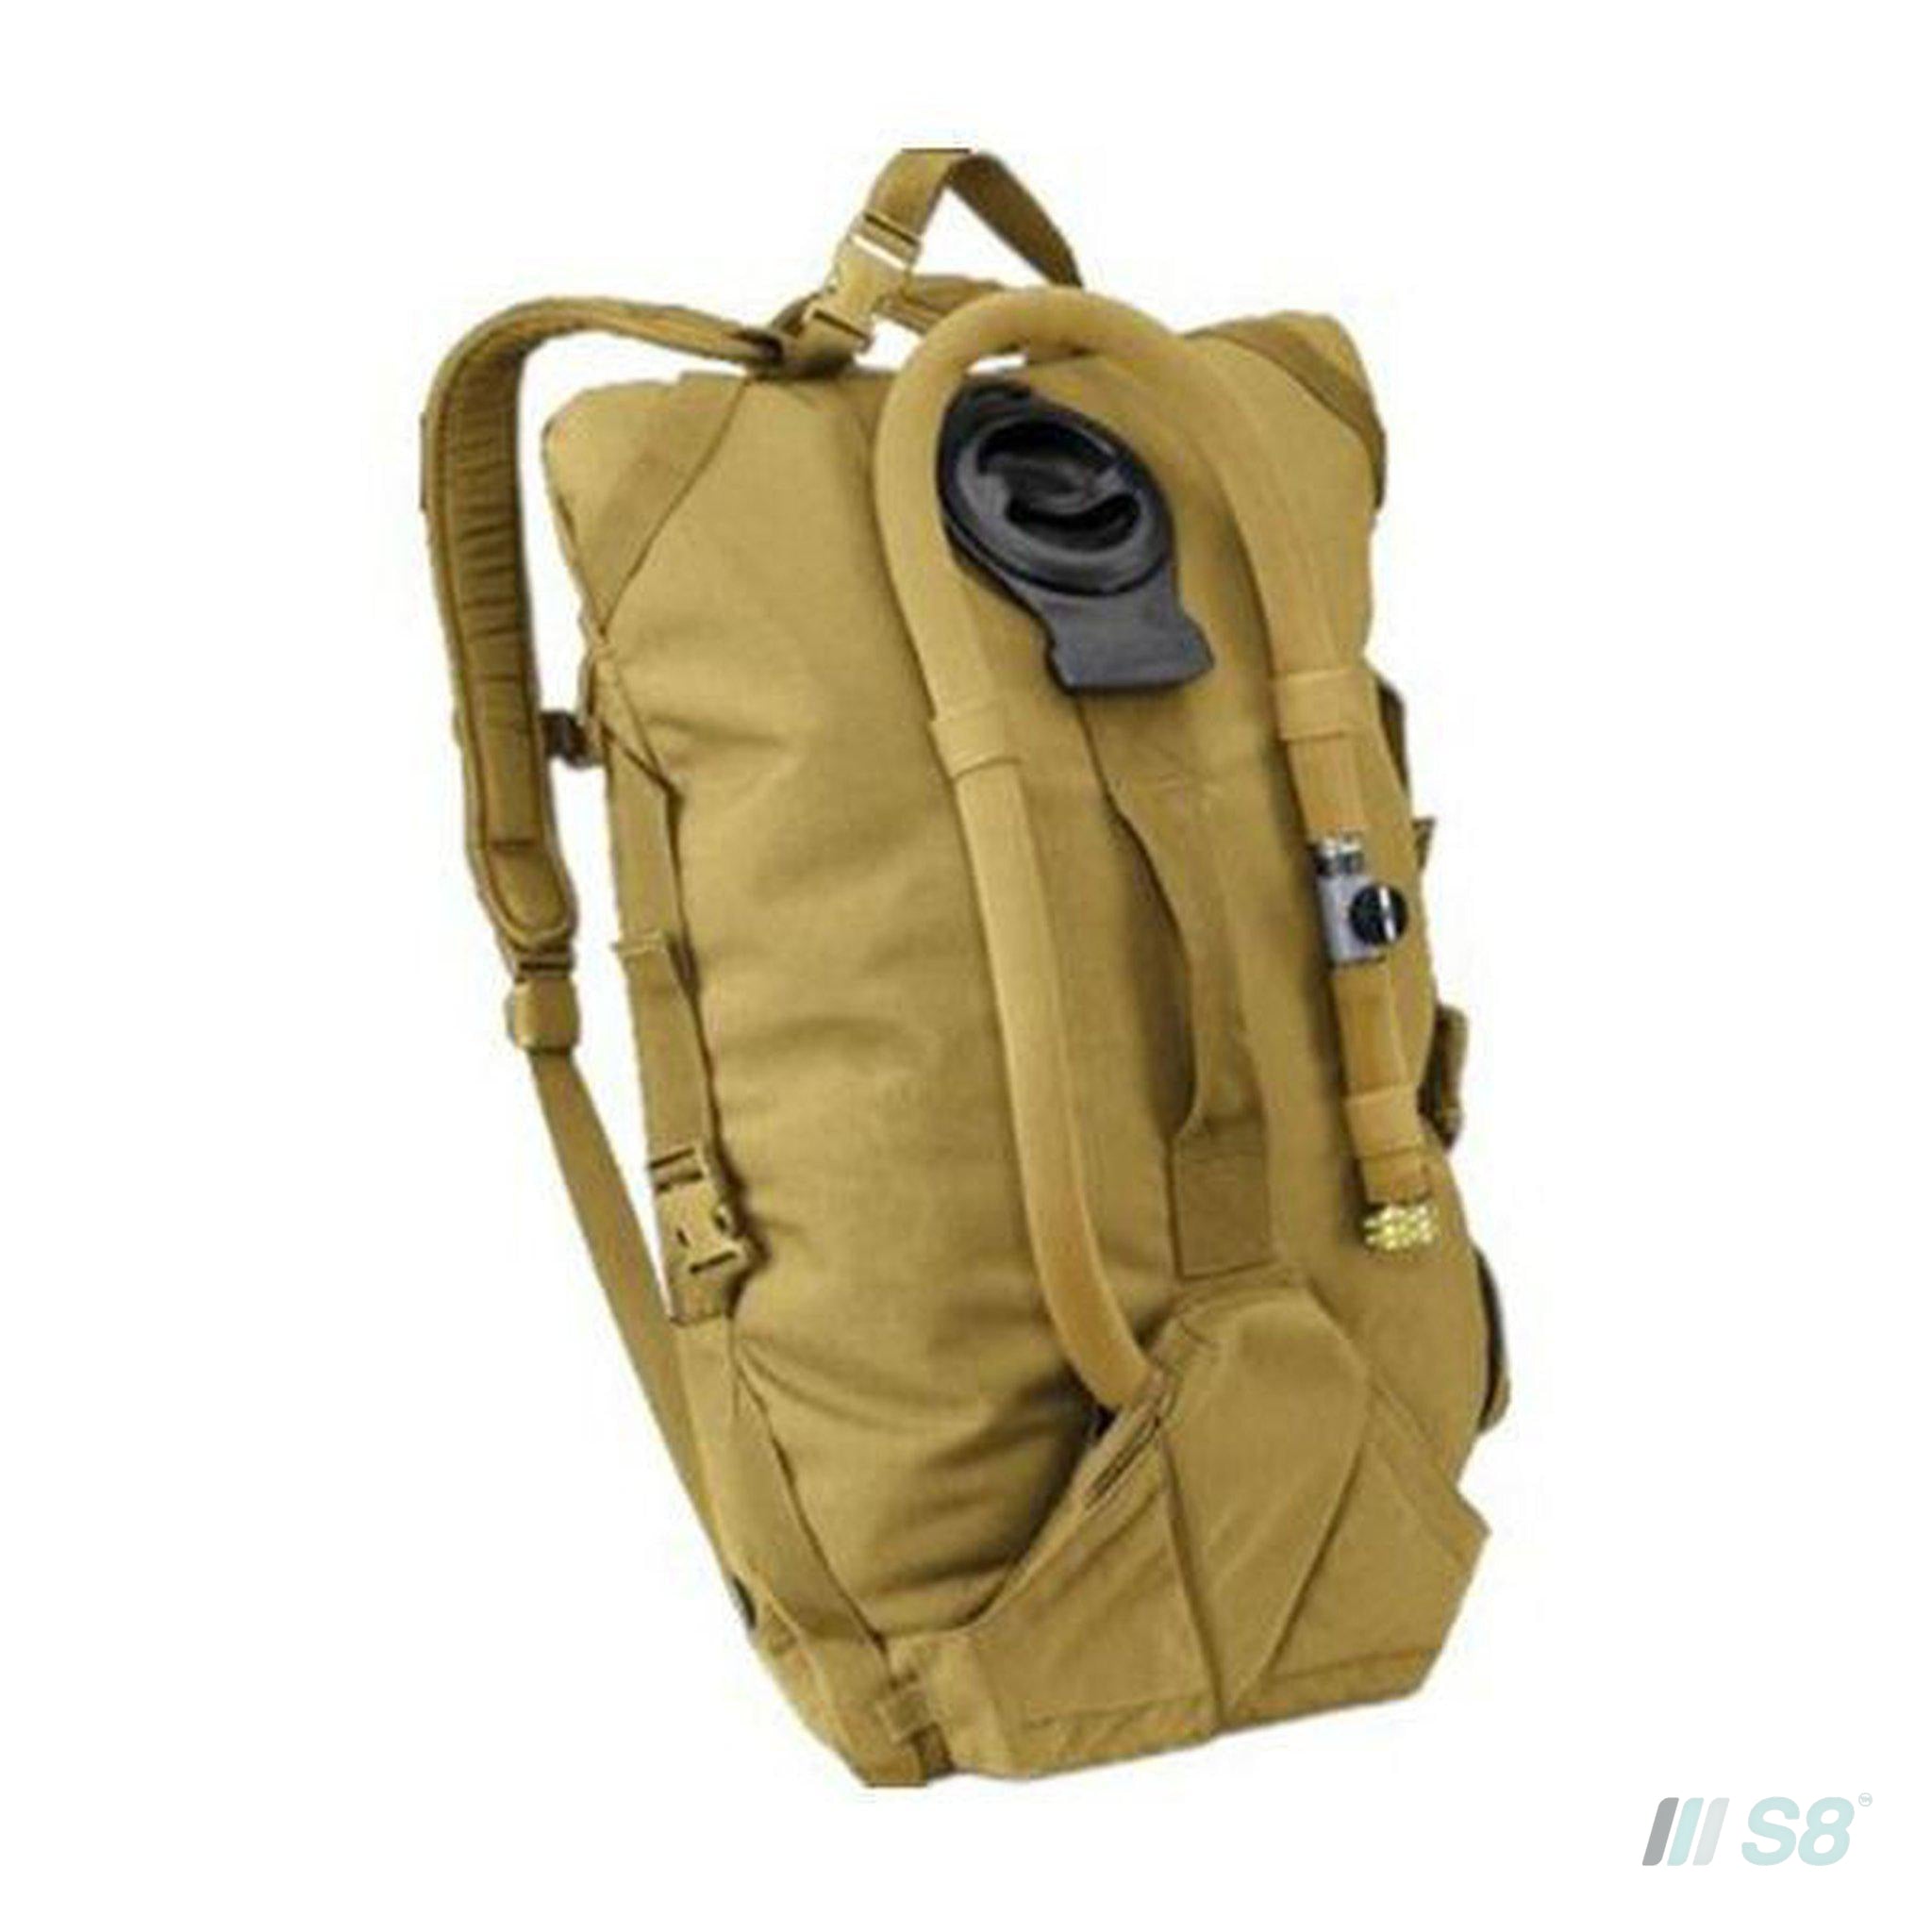 Camelbak Squadbak 25L Omega Military Hydration pack - Coyote-Camelbak-S8 Products Group